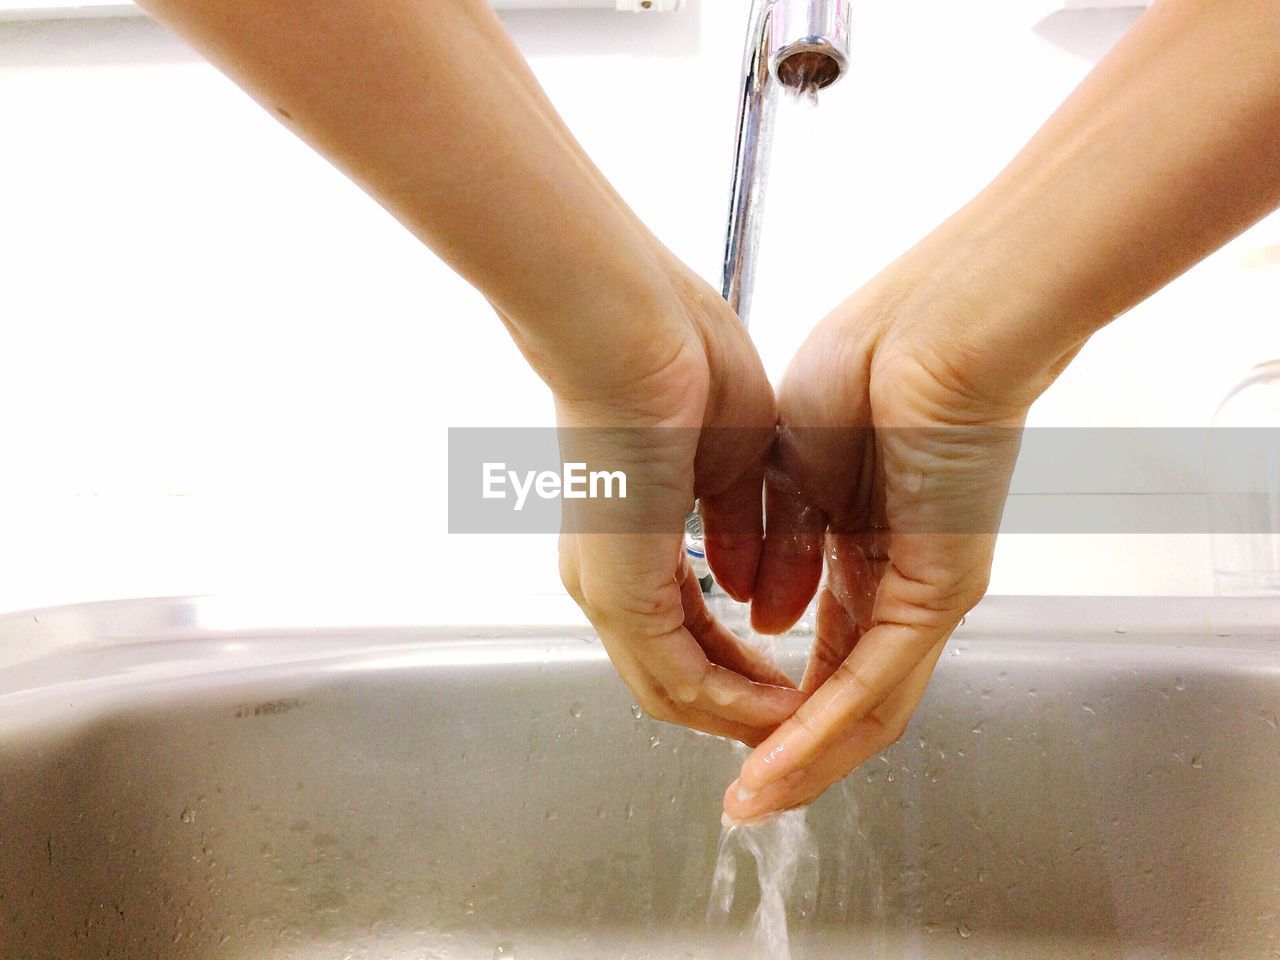 Close-up of woman washing hands below faucet in sink